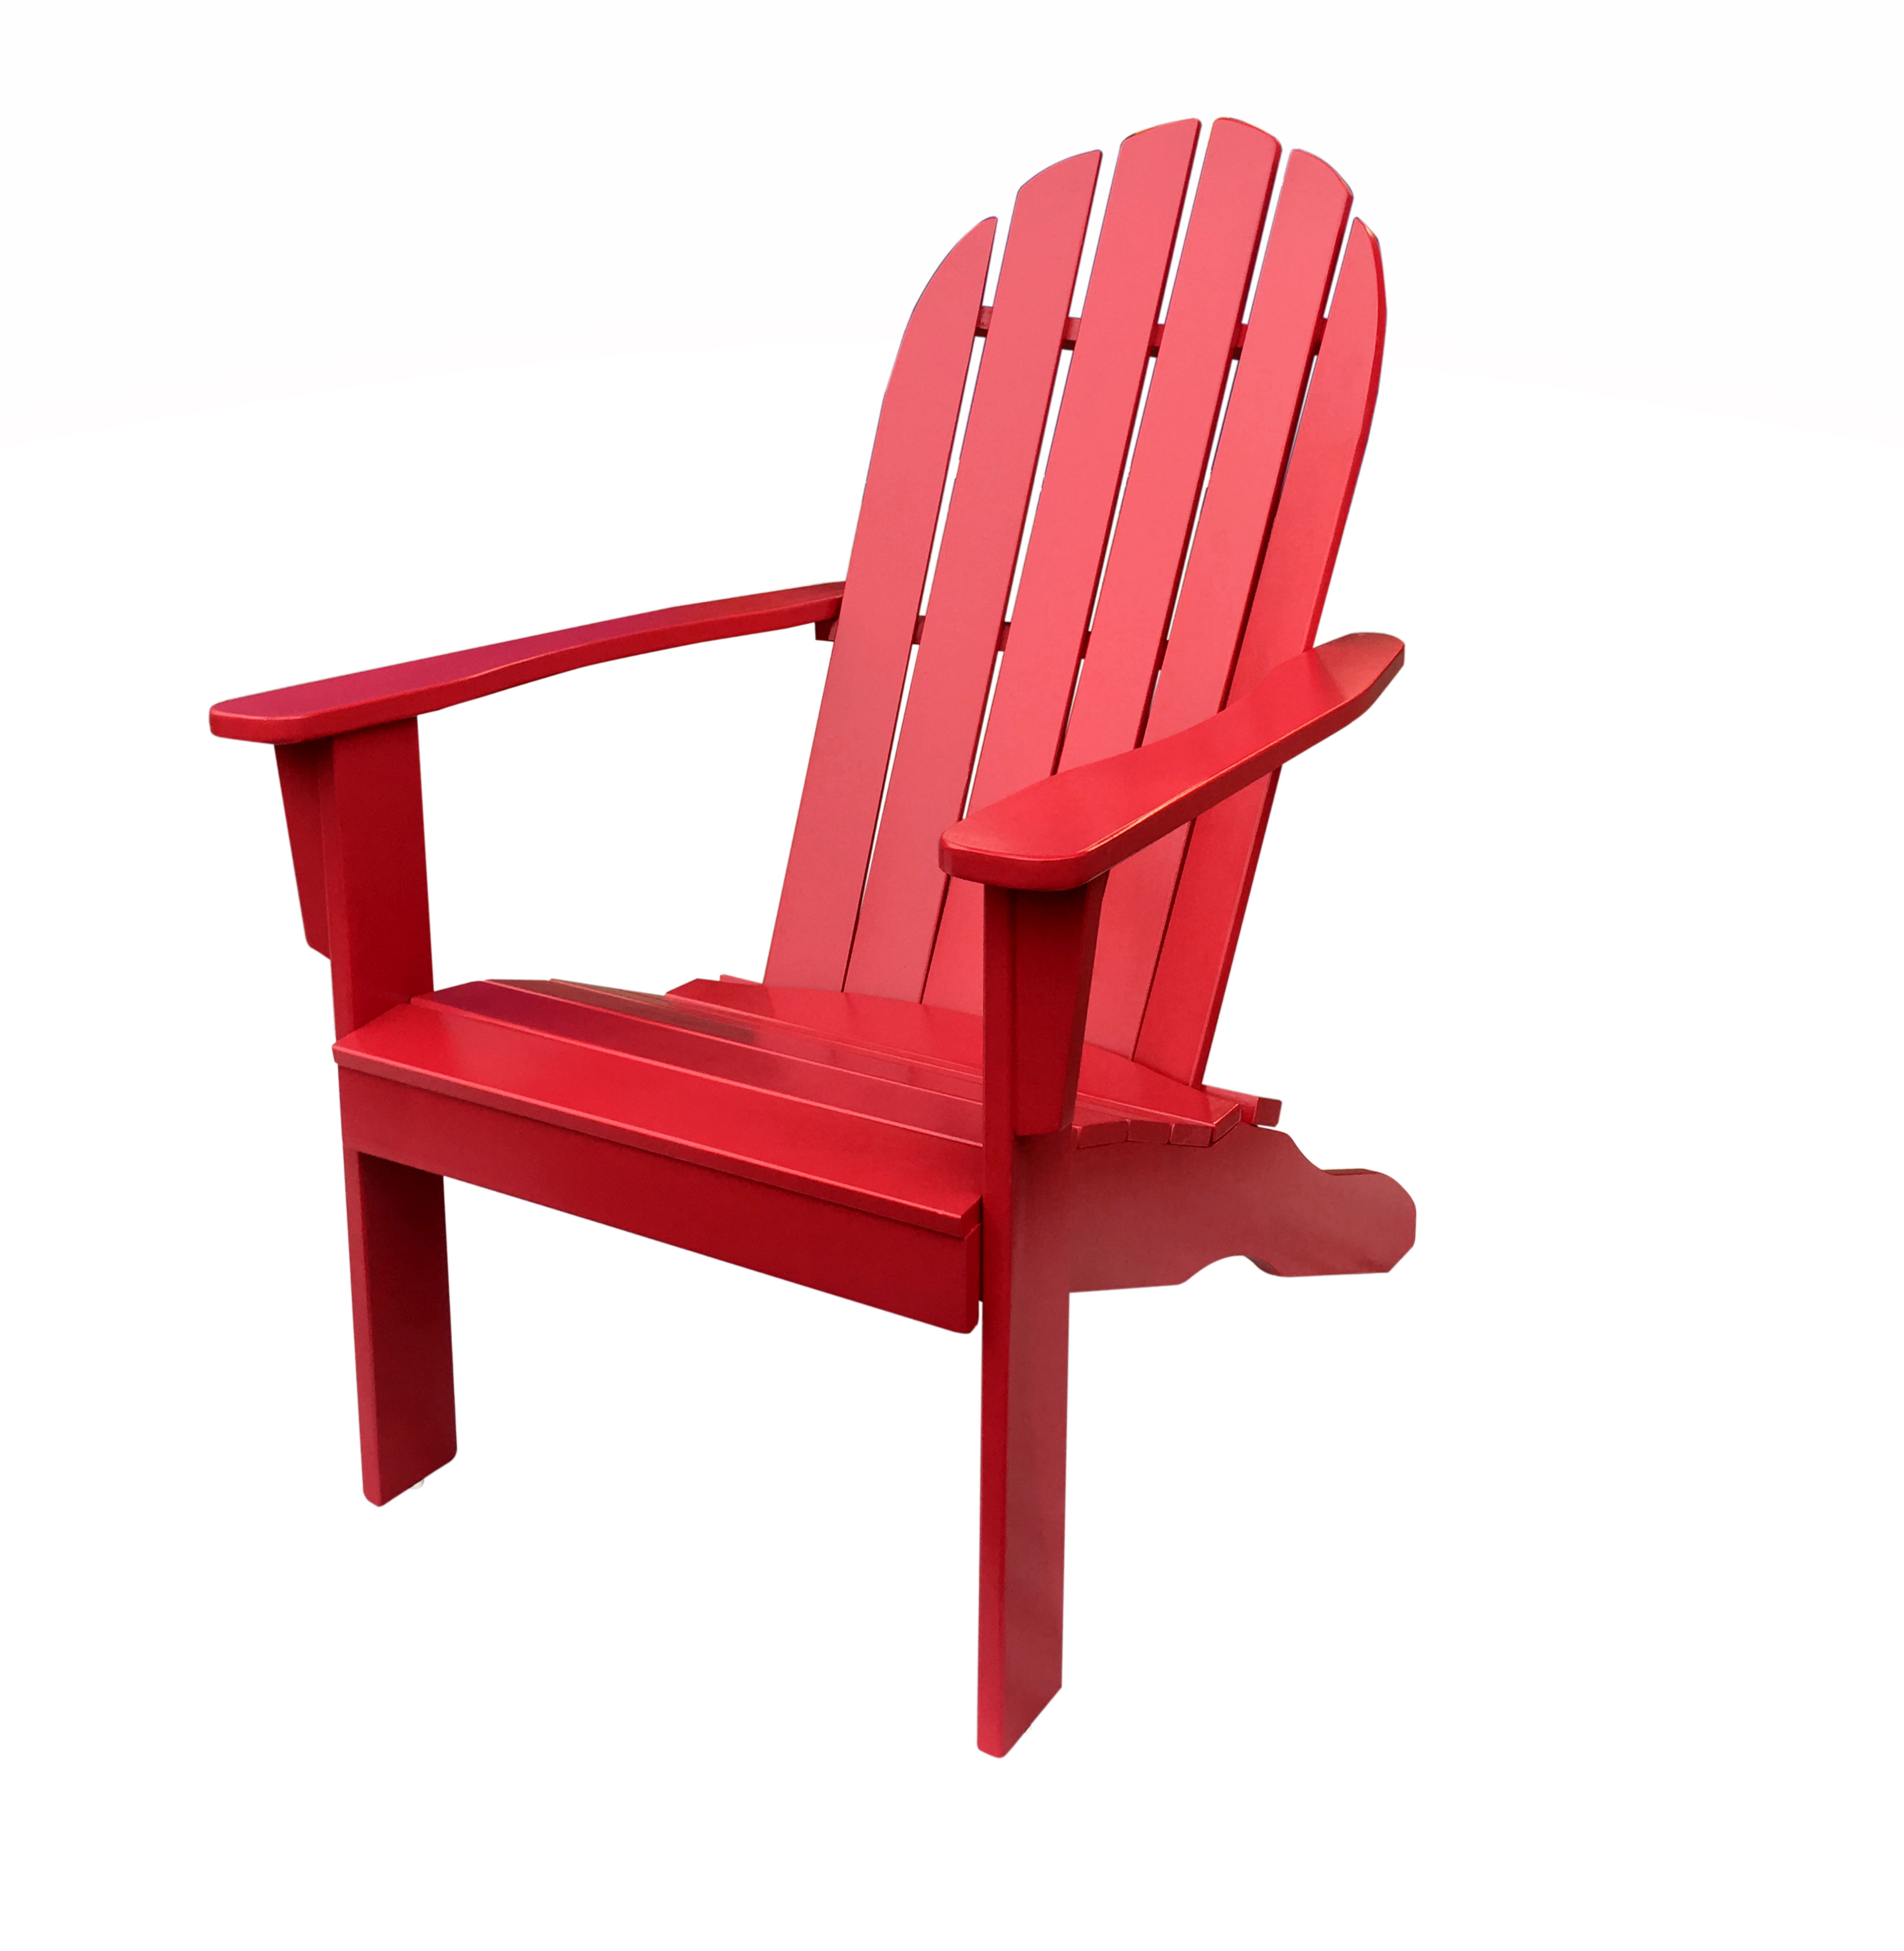 Mainstays Wood Outdoor Adirondack Chair, Red Color - image 2 of 8